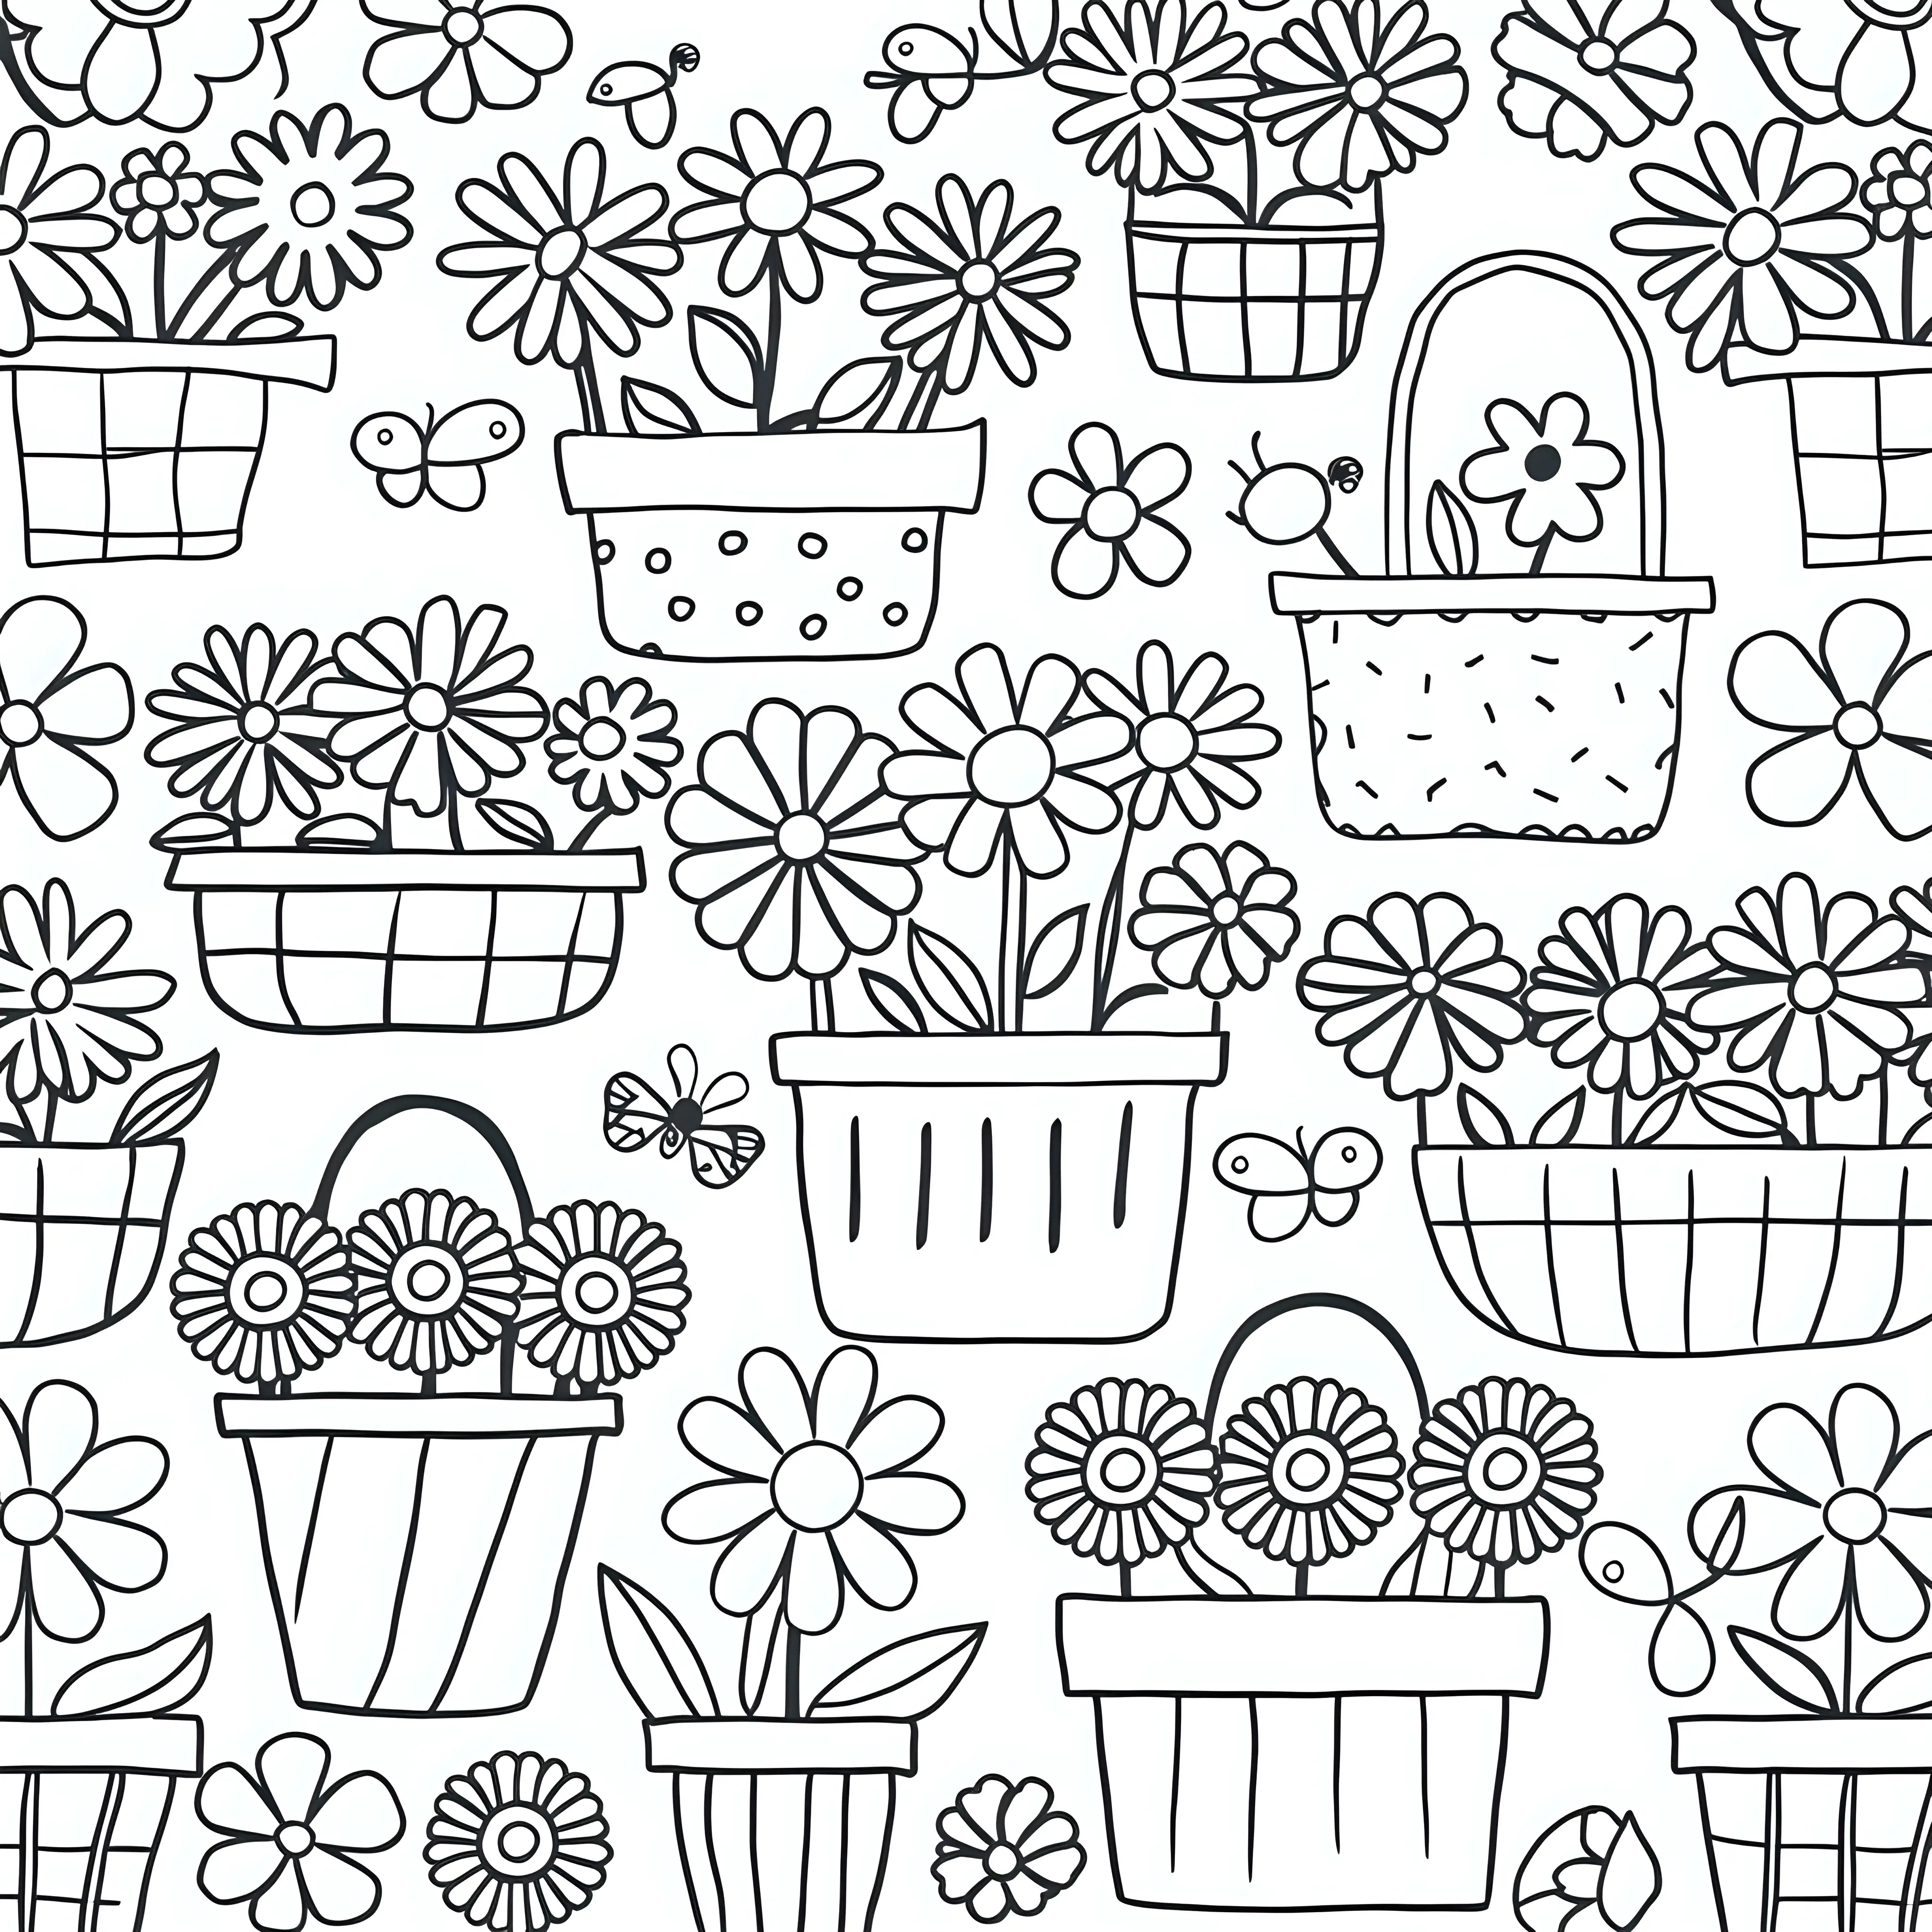 Adorable Flower Baskets Coloring Page Whimsical Floral Design for Relaxation